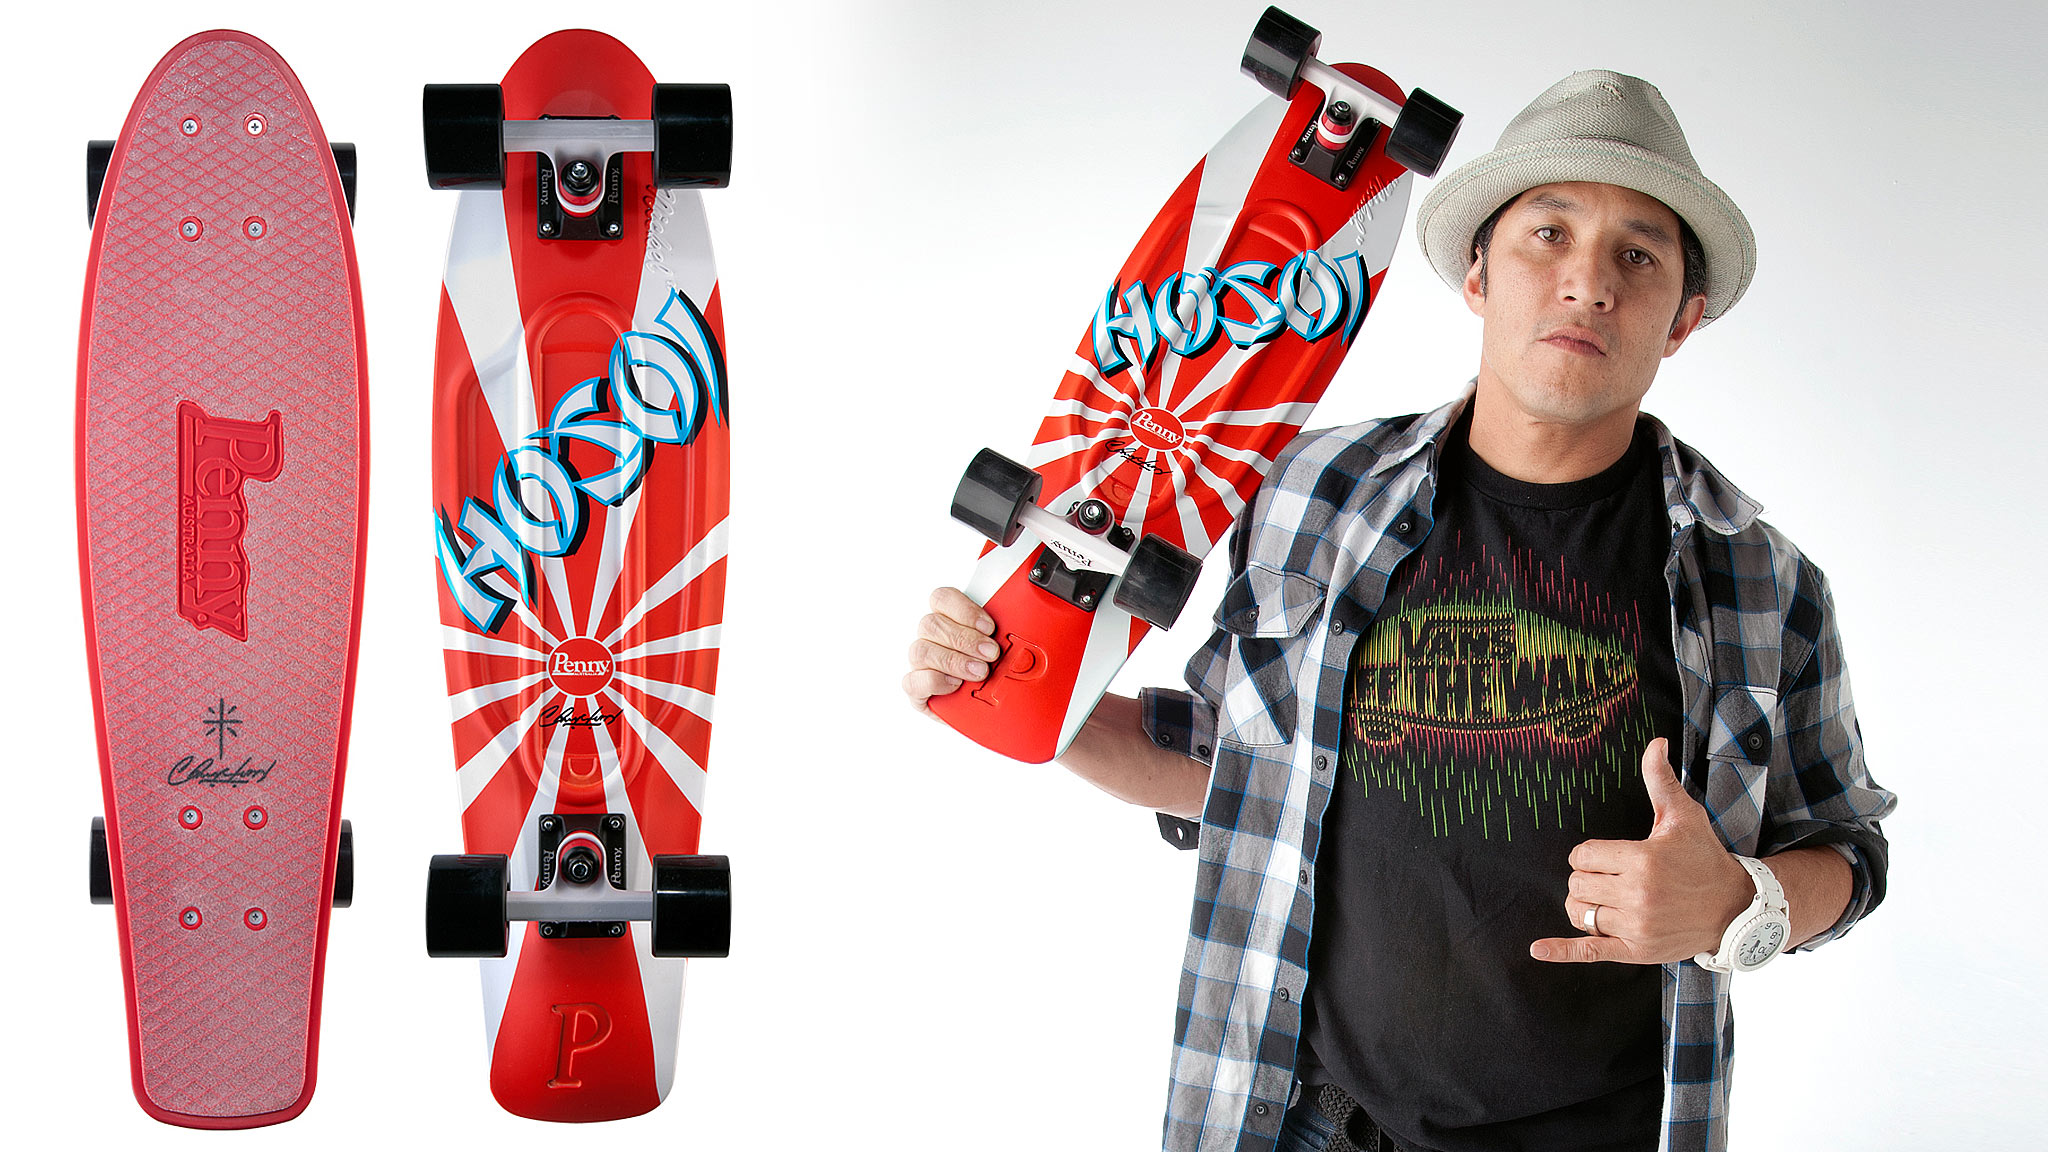 The Hosoi Penny Board Will Look Good Under Your Feet - Christian Hosoi Penny , HD Wallpaper & Backgrounds